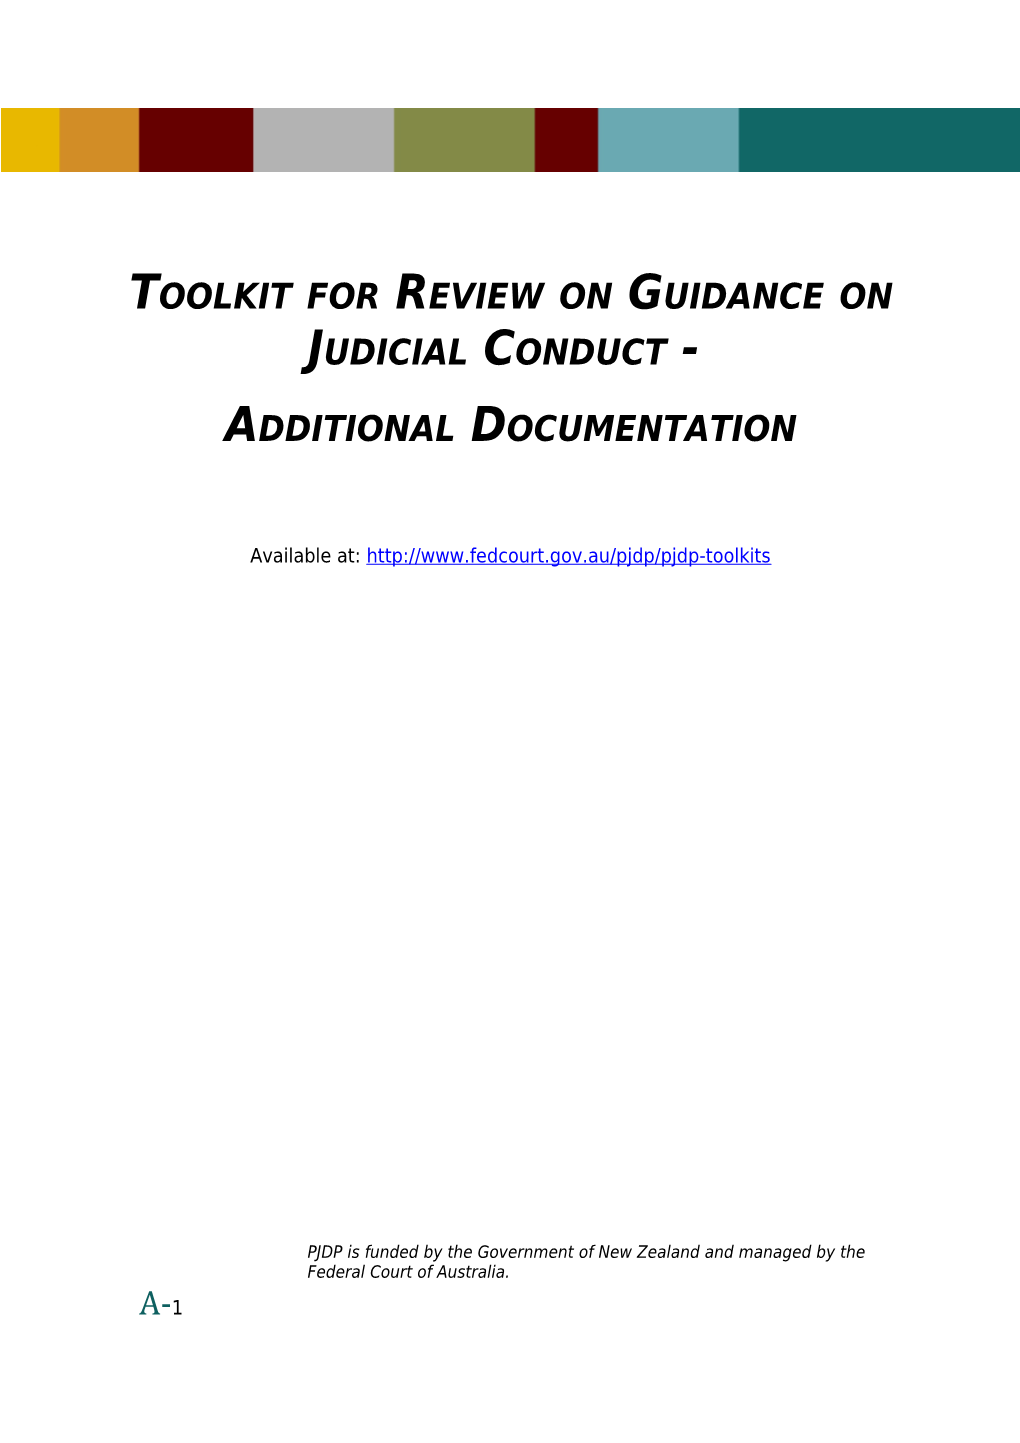 Toolkit for Review of Guidance on Judicial Conduct Additional Documentation